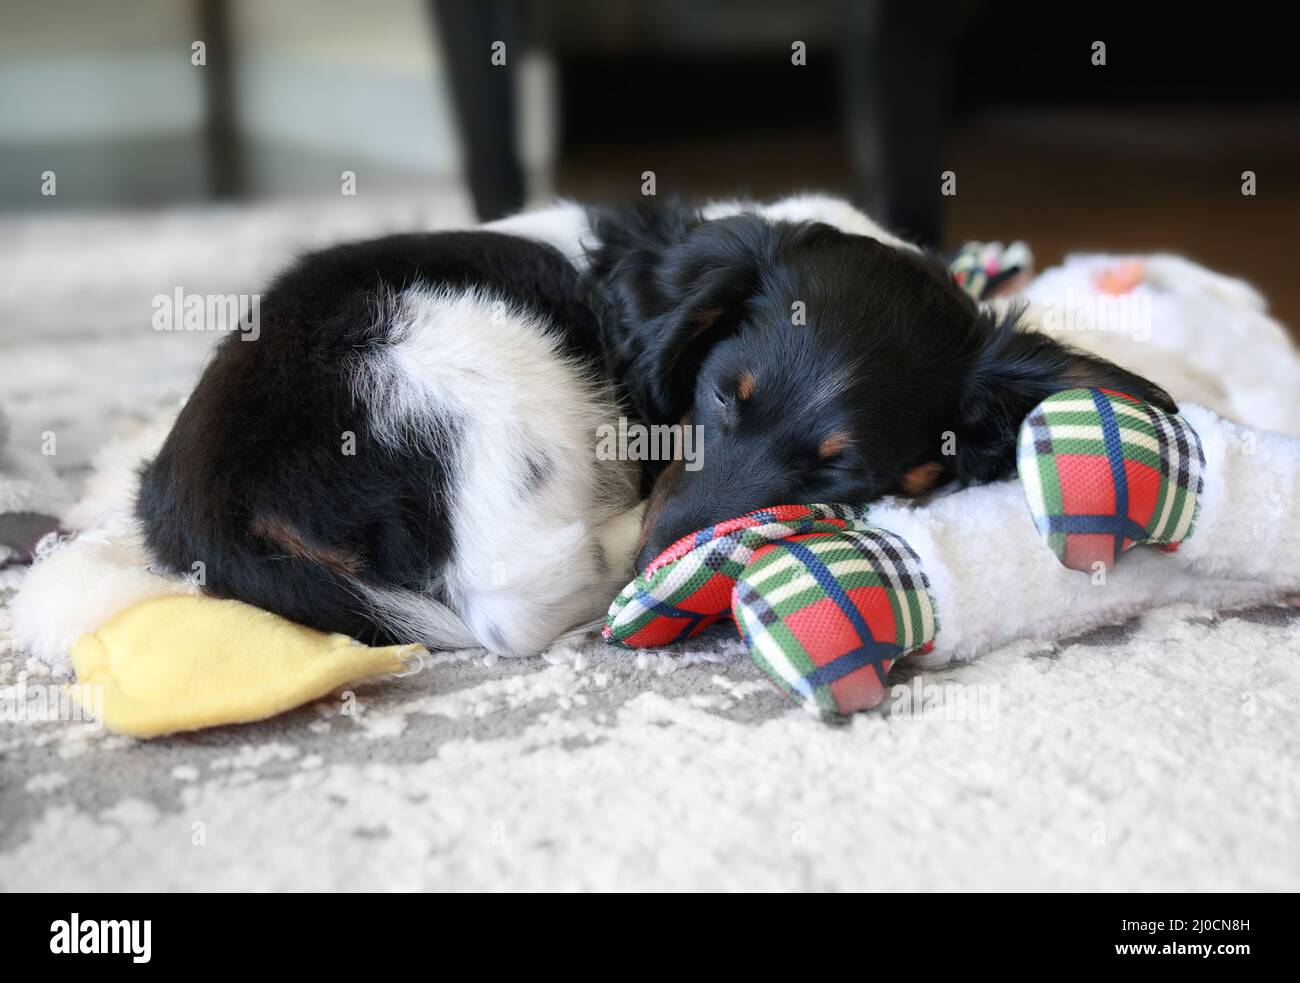 Puppy curled up on living room floor carpet, in-between toys. The 12 week old male puppy is exhausted from walking and playing. Black and white long h Stock Photo